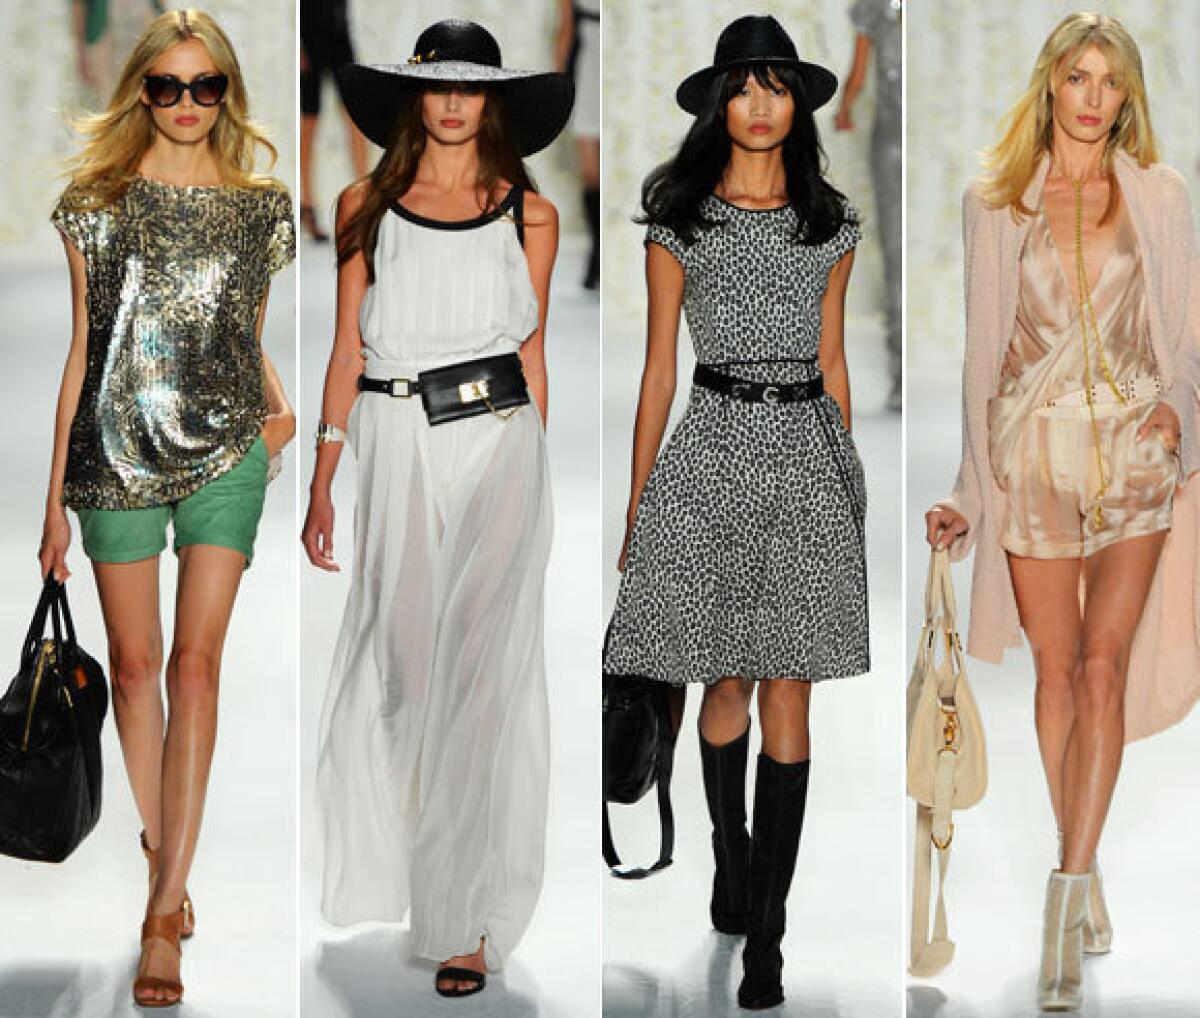 Looks from the Rachel Zoe spring-summer 2013 collection shown during New York Fashion Week.